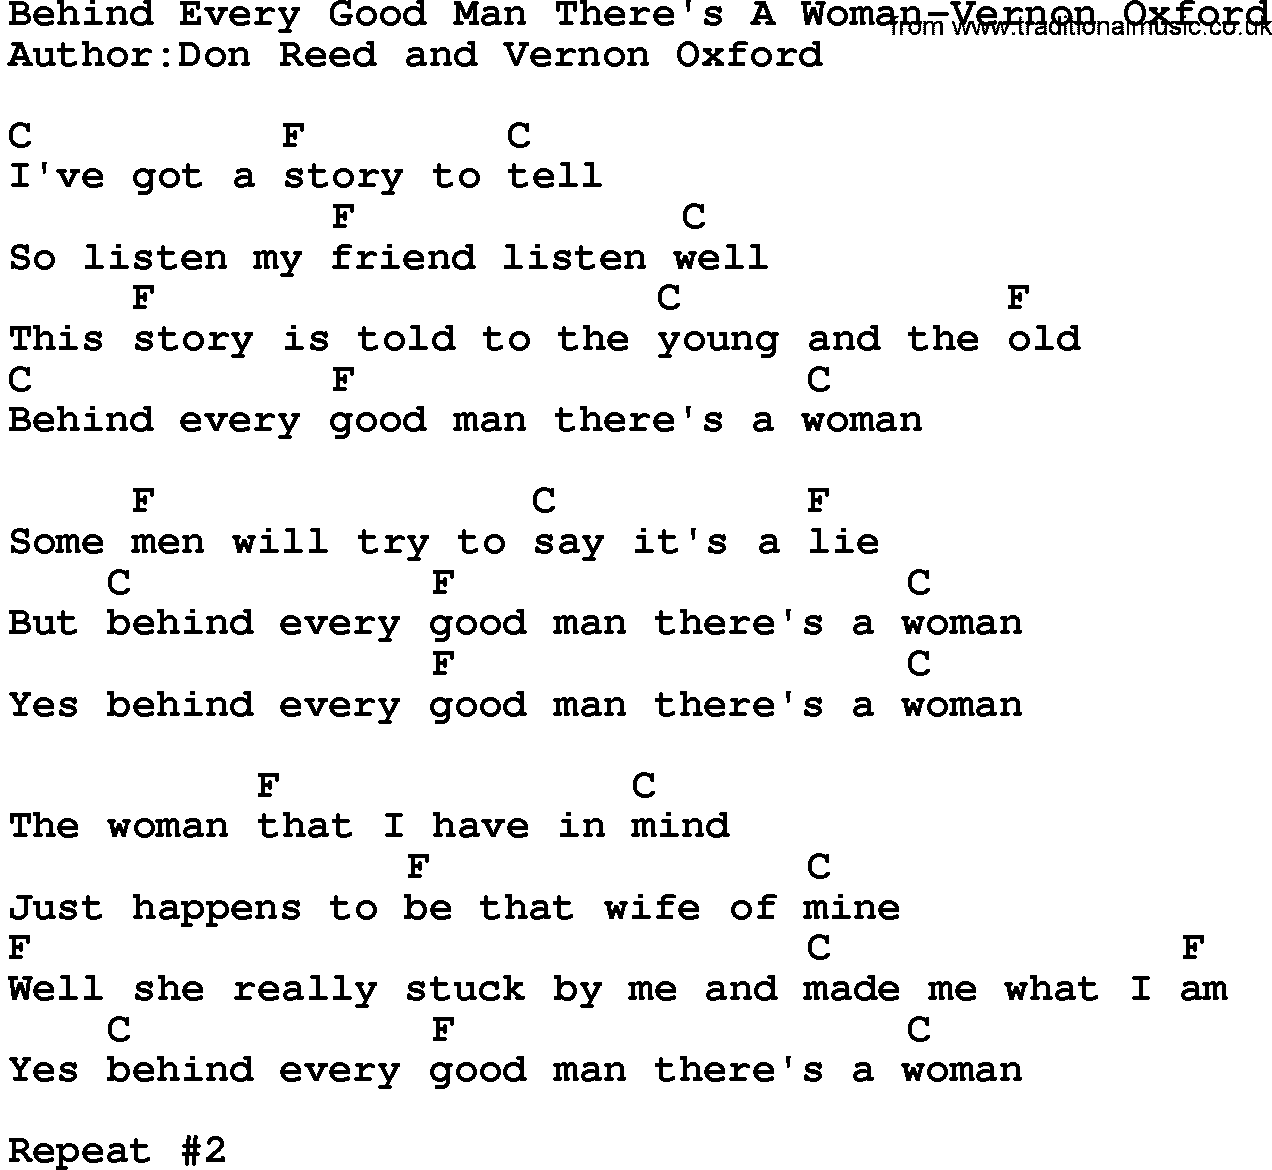 Country music song: Behind Every Good Man There's A Woman-Vernon Oxford lyrics and chords